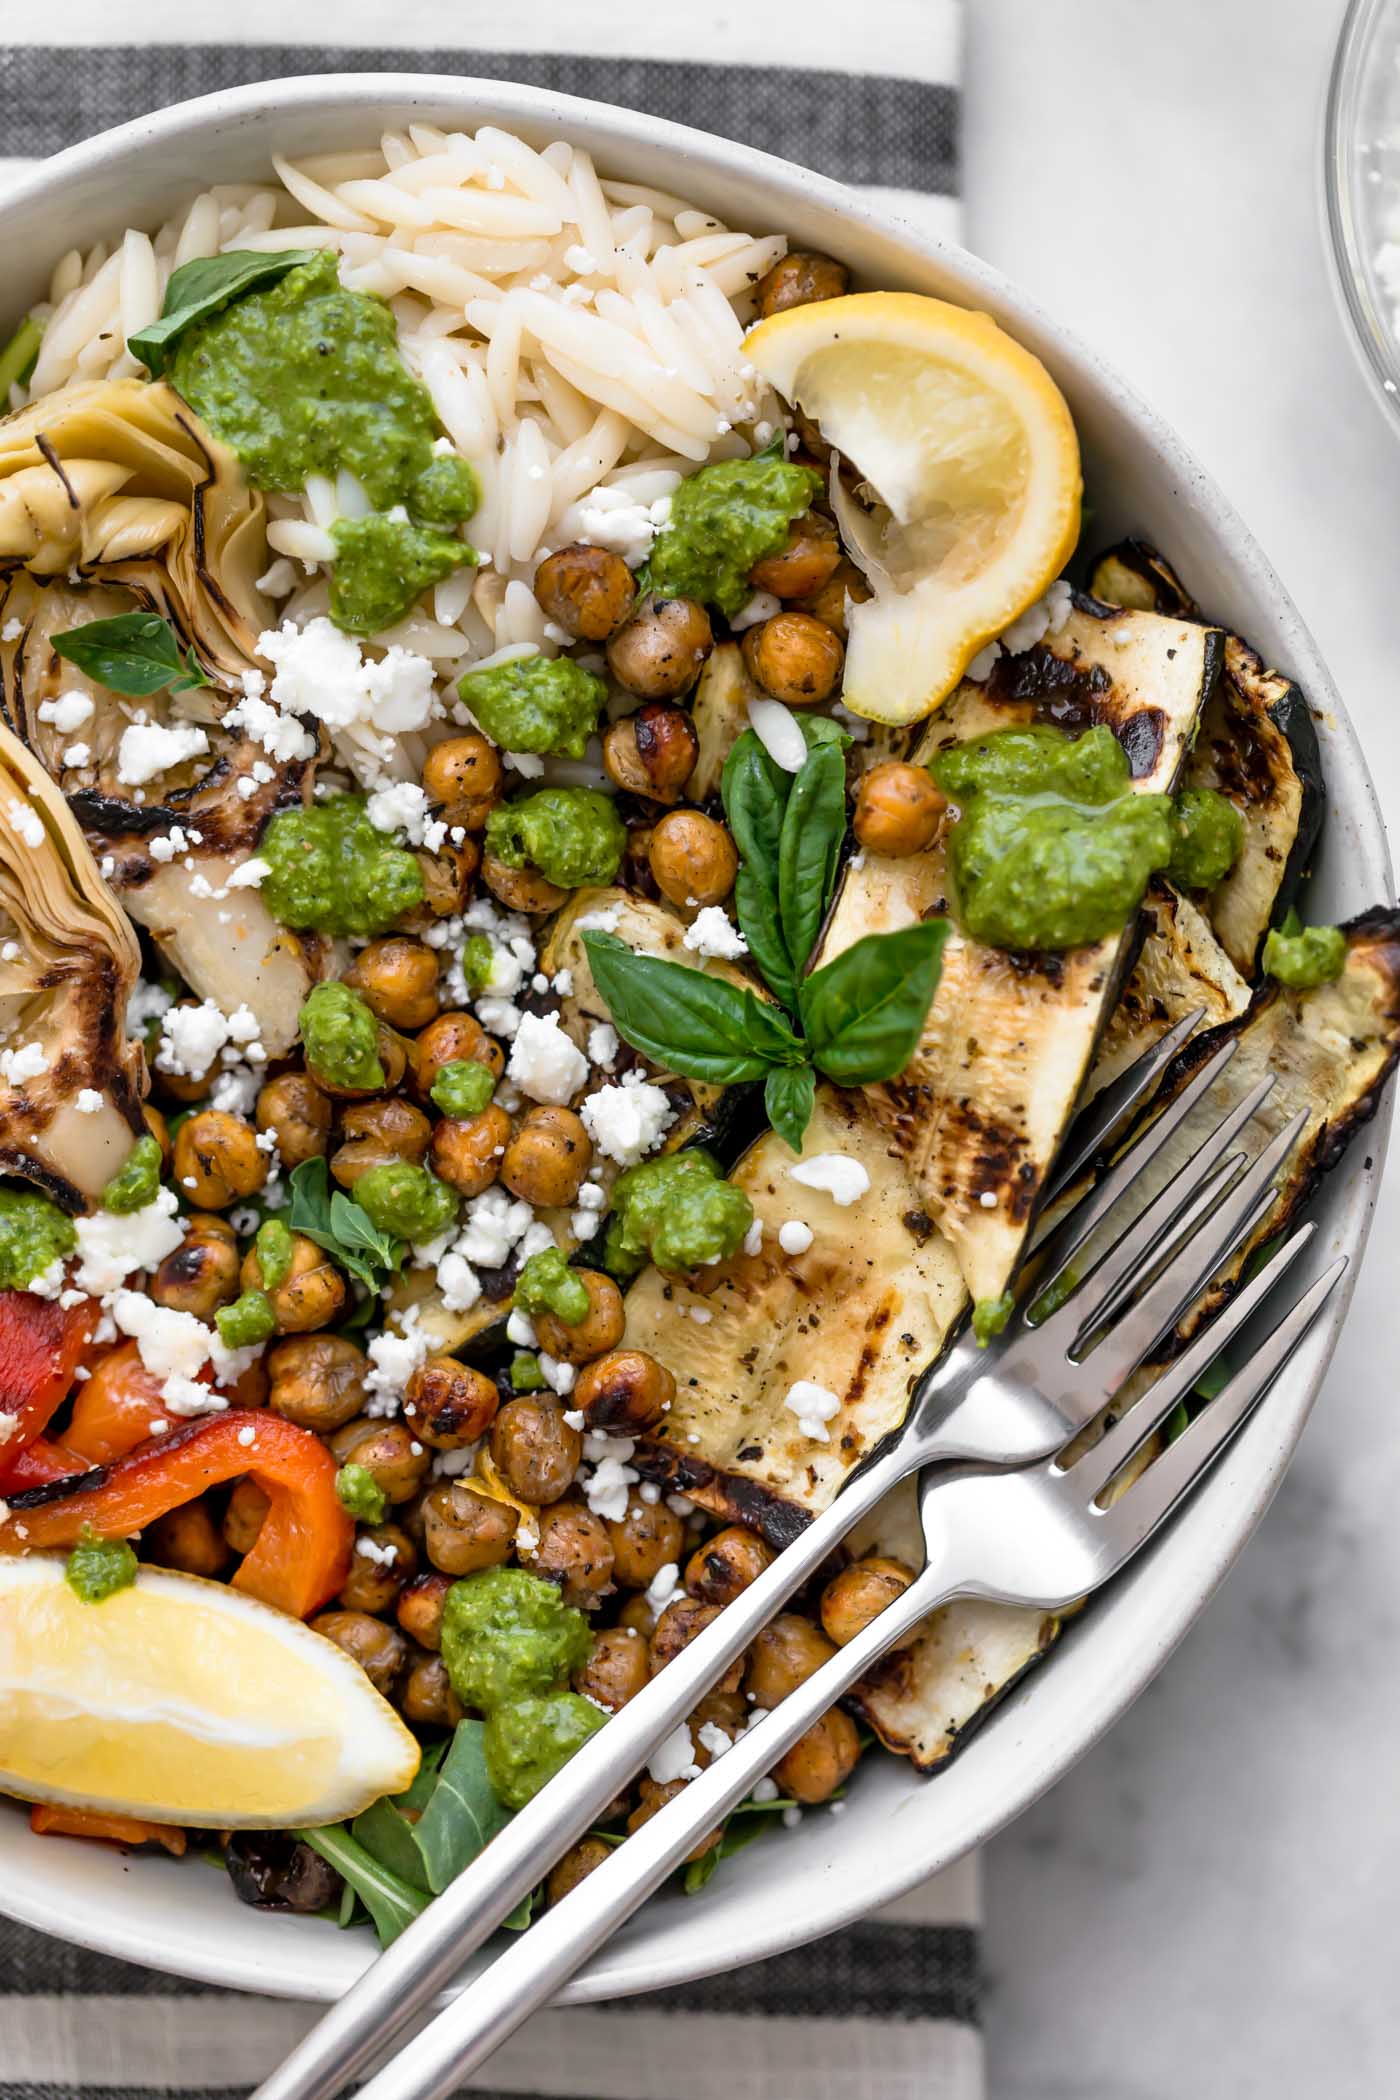 grilled vegetable primavera bowls with pesto & smoky chickpeas! an easy 30-minute vegetarian recipe perfect for the end of summer, with grilled zucchini, grilled bell pepper, grilled artichoke hearts, and smoky grilled chickpeas, plus orzo & lemony pesto. totally healthy, naturally plant-based, easily made gluten-free, & perfect for meal prep! #playswellwithbutter #vegetableprimavera #vegetablerecipes #healthyvegetableprimavera #easydinnerrecipes #healthyvegetarianrecipes #vegetarianmealprep #zucchinirecipes #mealpreprecipes